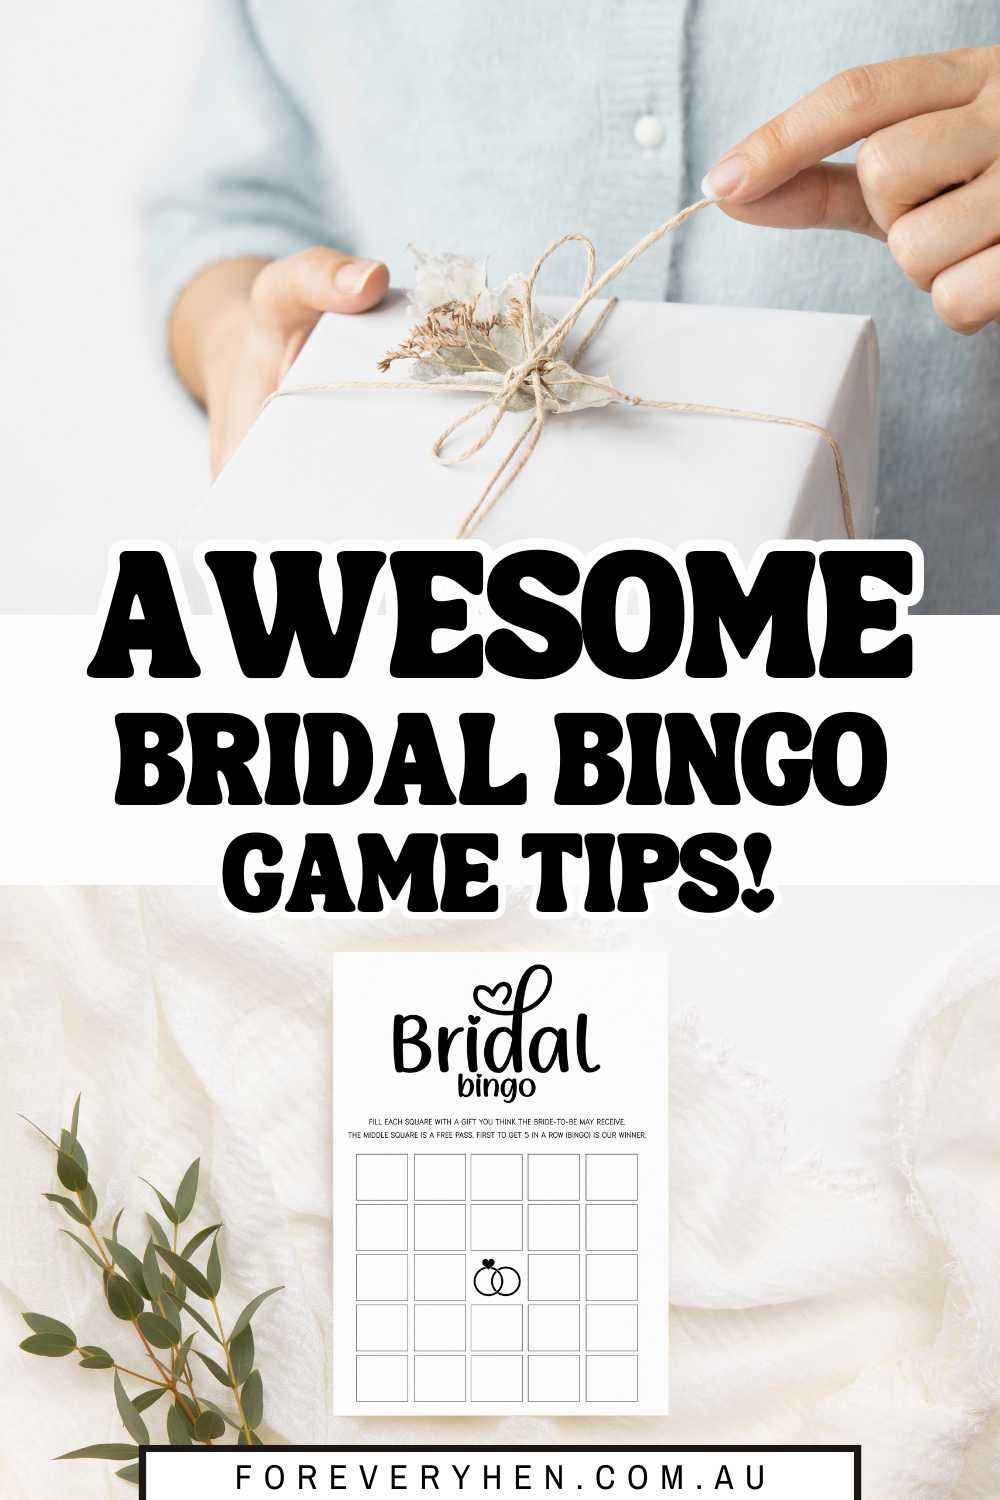 Image of a bridal bingo card lying next to some leaves. Text overlay: How to play the ultimate game of bridal shower bingo!